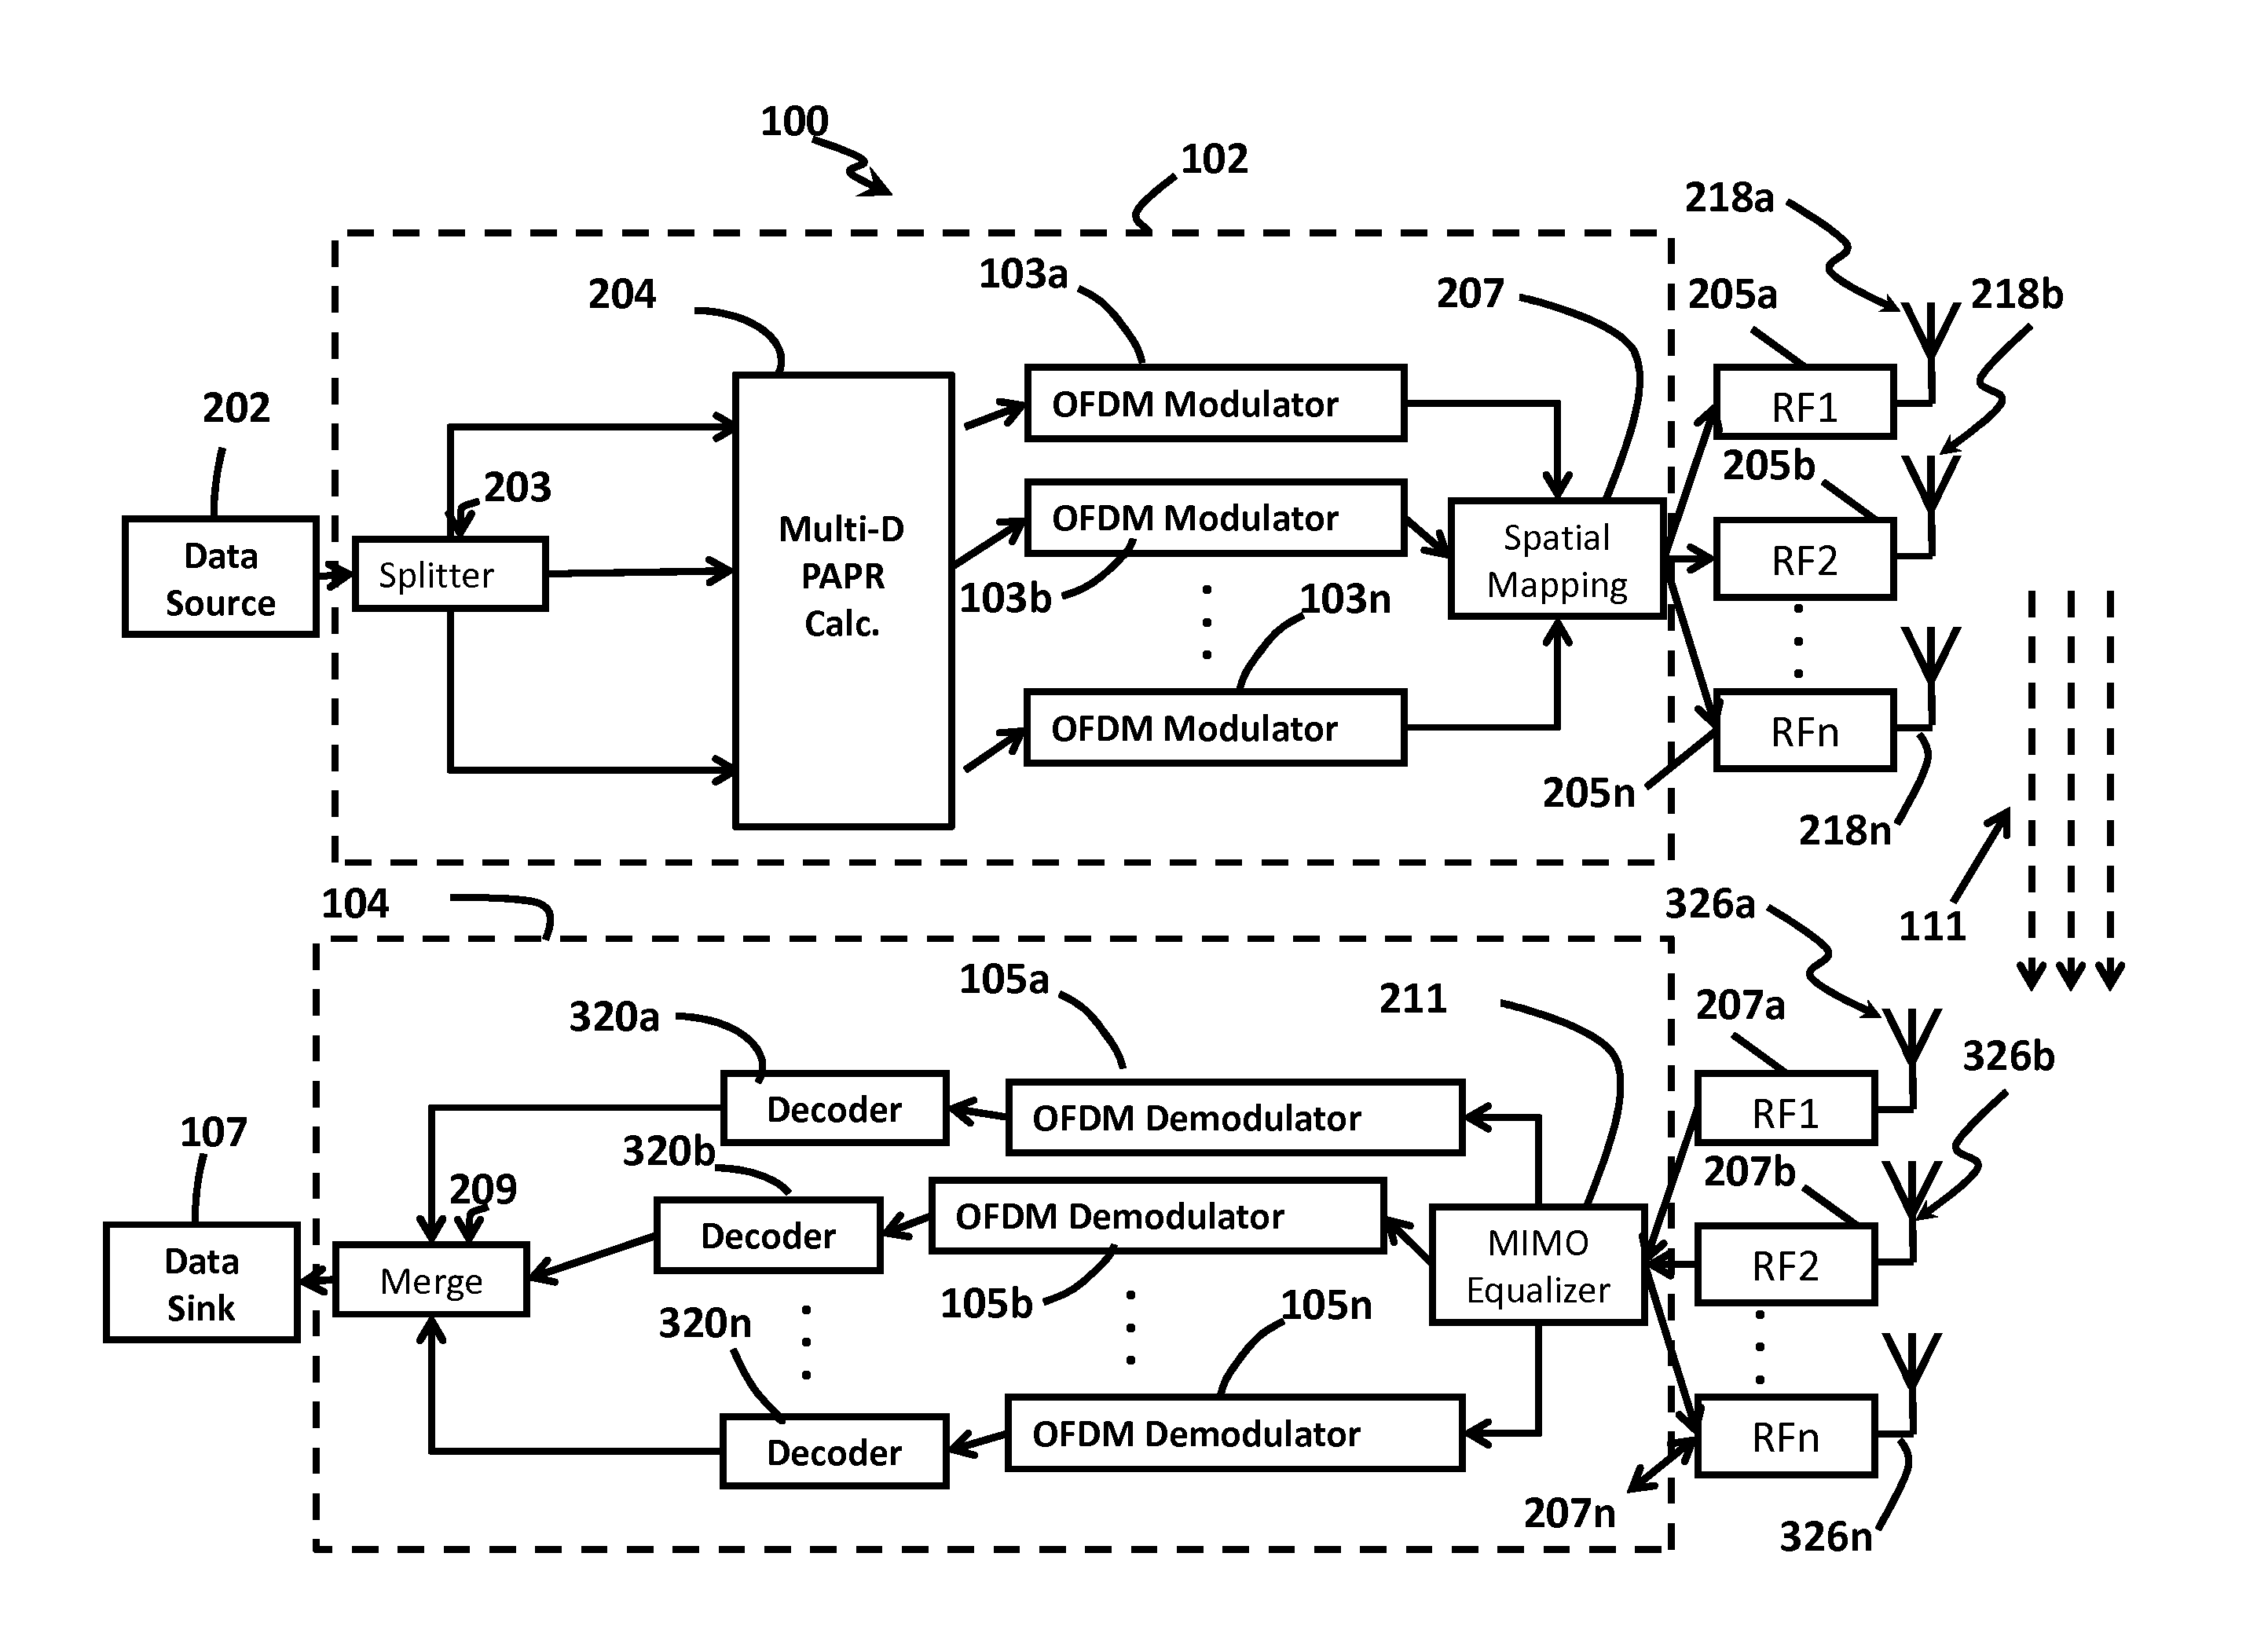 Method and apparatus for controlling out-of-band interference  using peak-to-average-power-ratio (PAPR) reduction with constraints